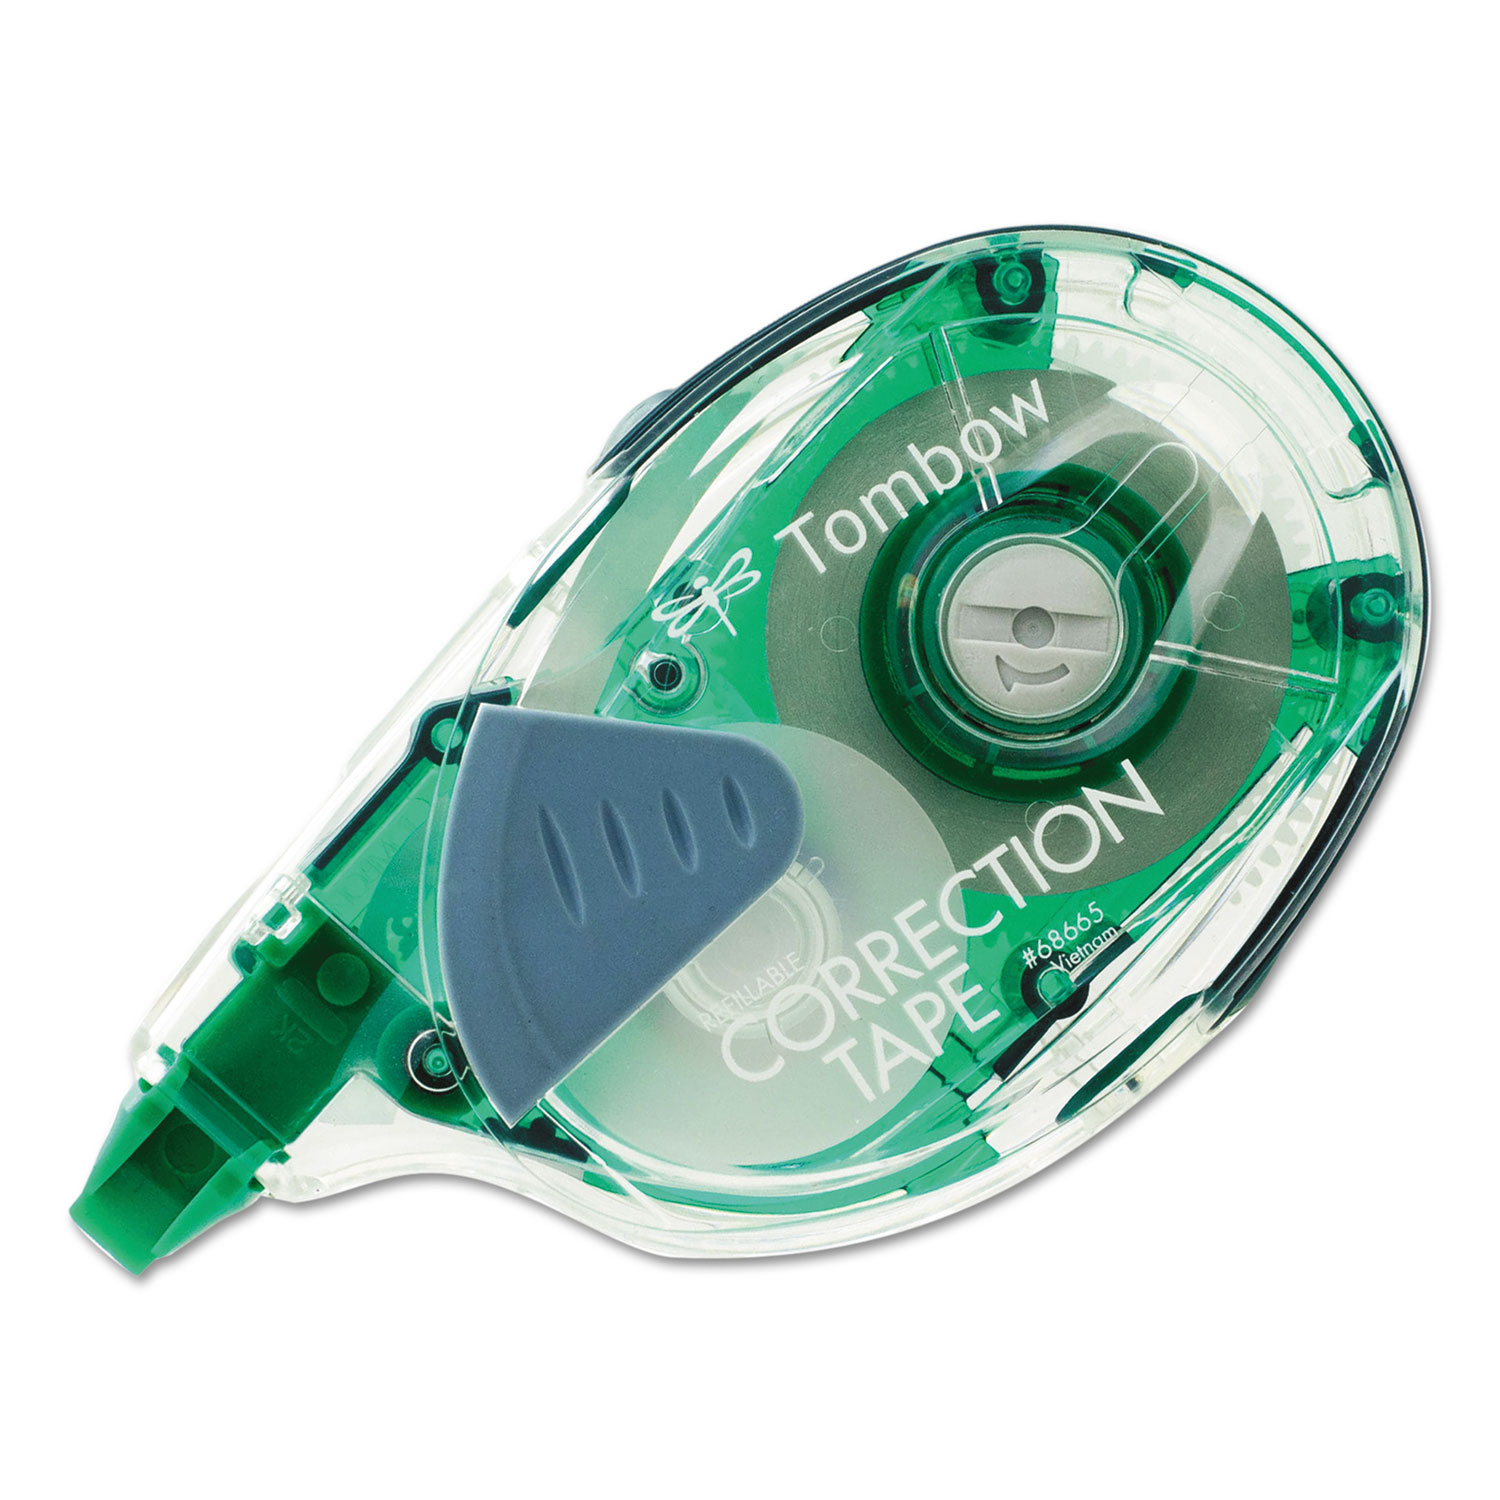 Tombow Mono Air Refillable Correction Tape - 5 mm x 10 m - Clear